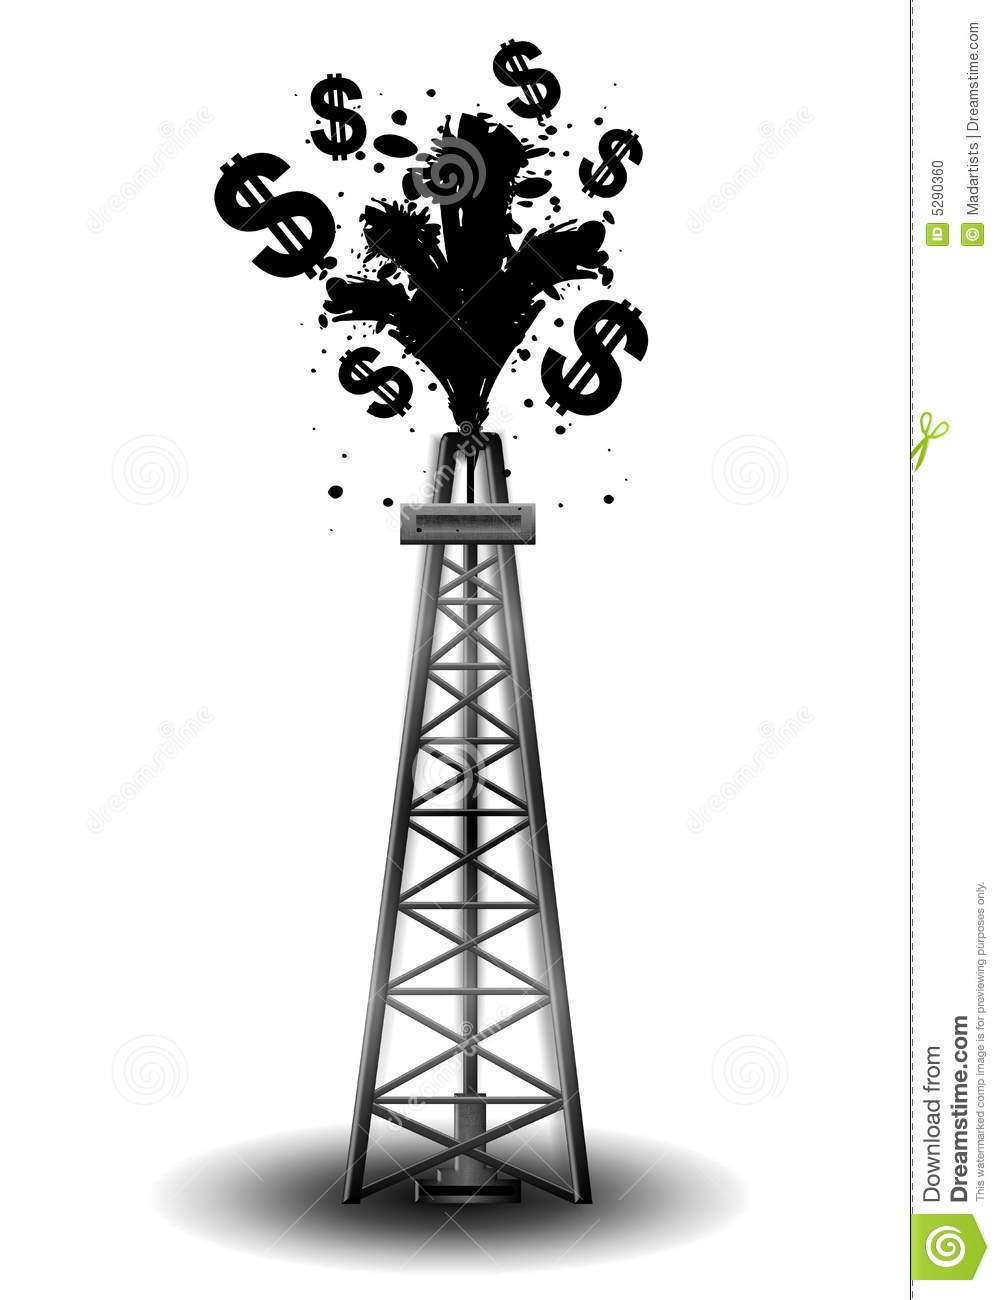 Drilling rig clipart - Clipground